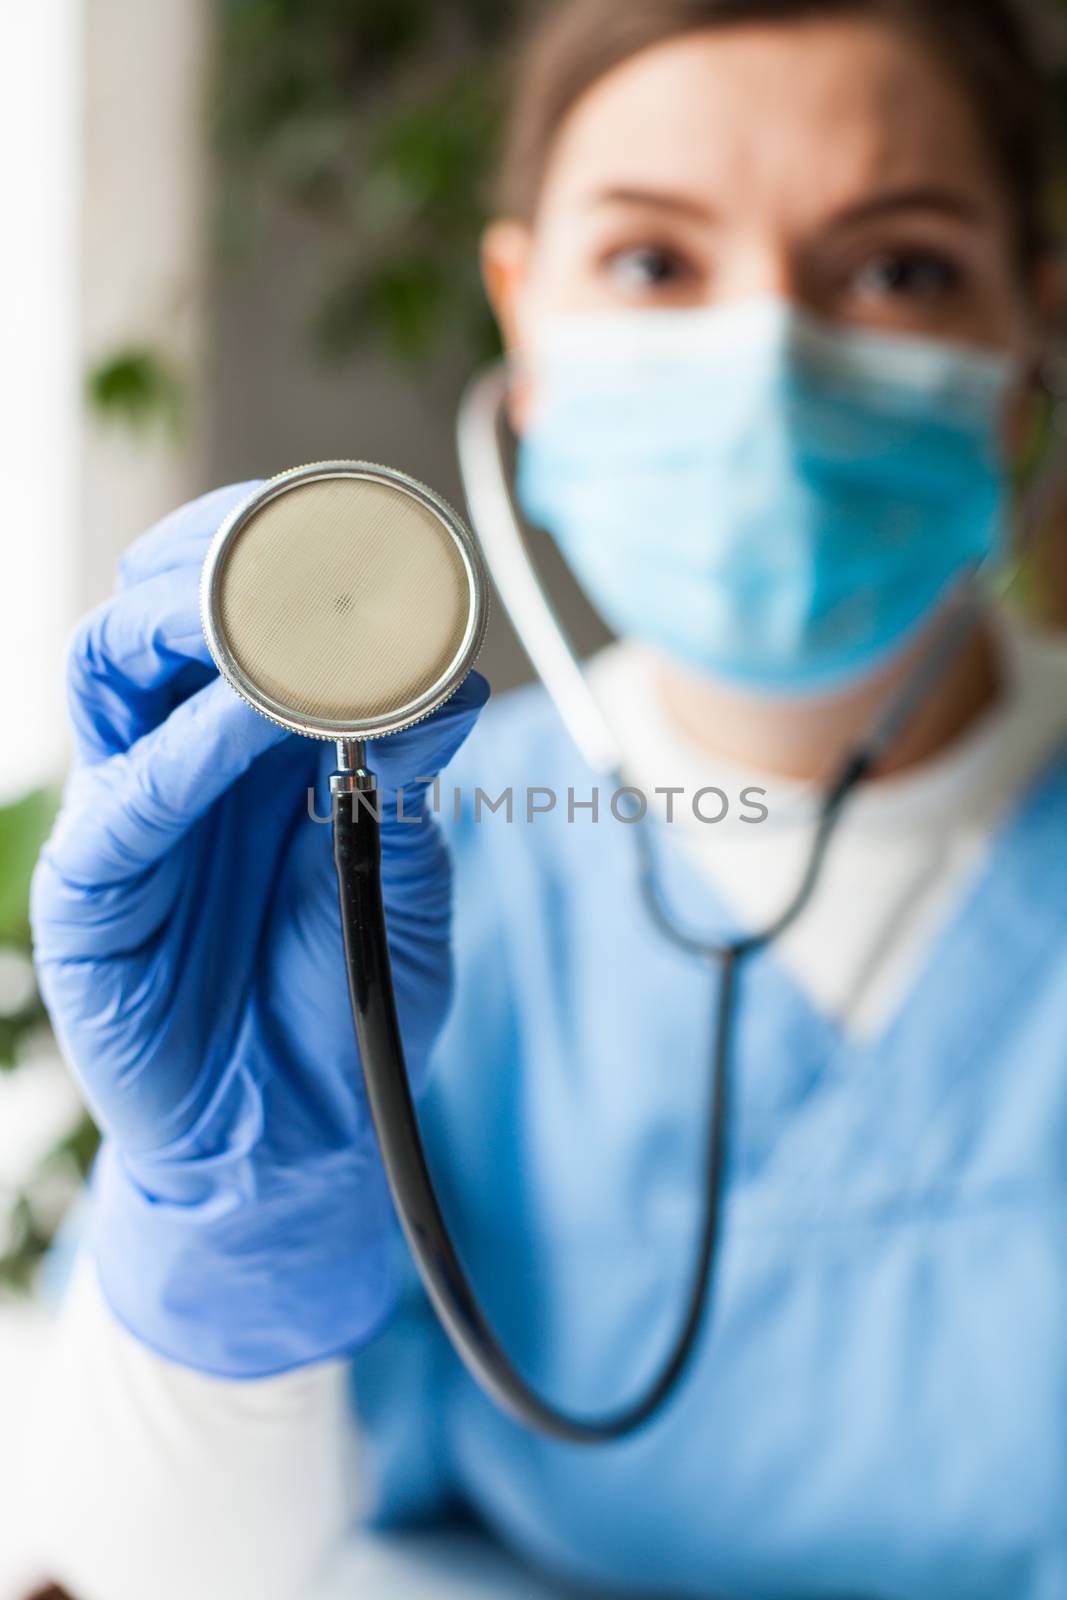 Caucasian female doctor holding a stethoscope, listening to patient body for sounds made by heart, lungs, intestines, measuring blood pressure, diagnostic and therapy, prevention and healthy lifestyle